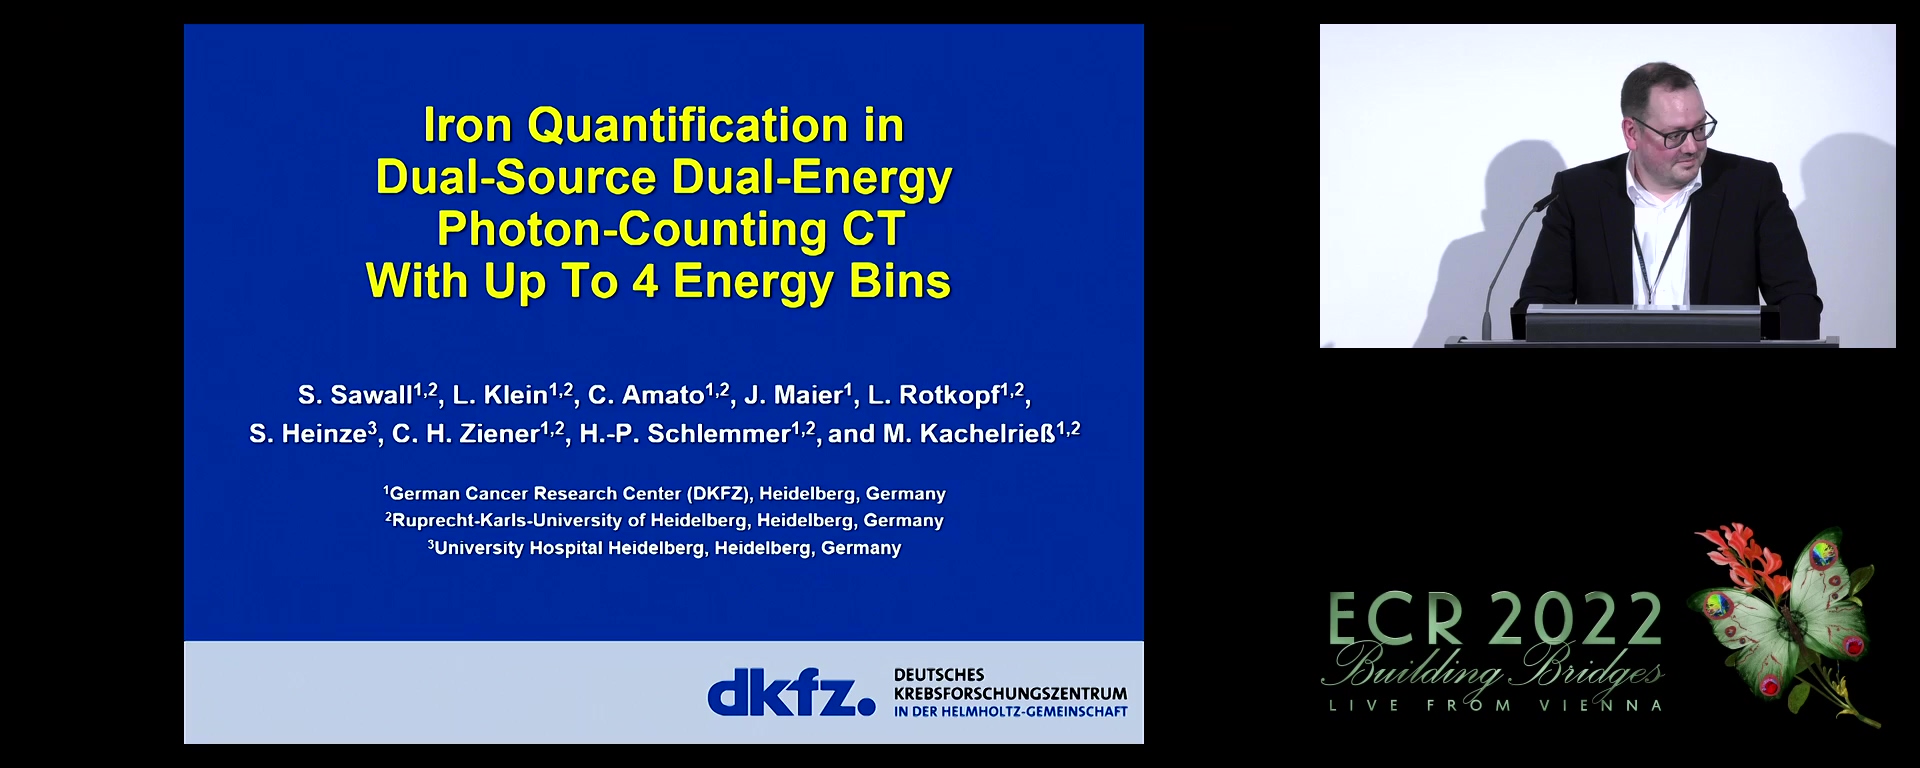 Iron quantification in dual-source dual-energy photon-counting CT with up to four energy bins - Stefan Sawall, Heidelberg / DE